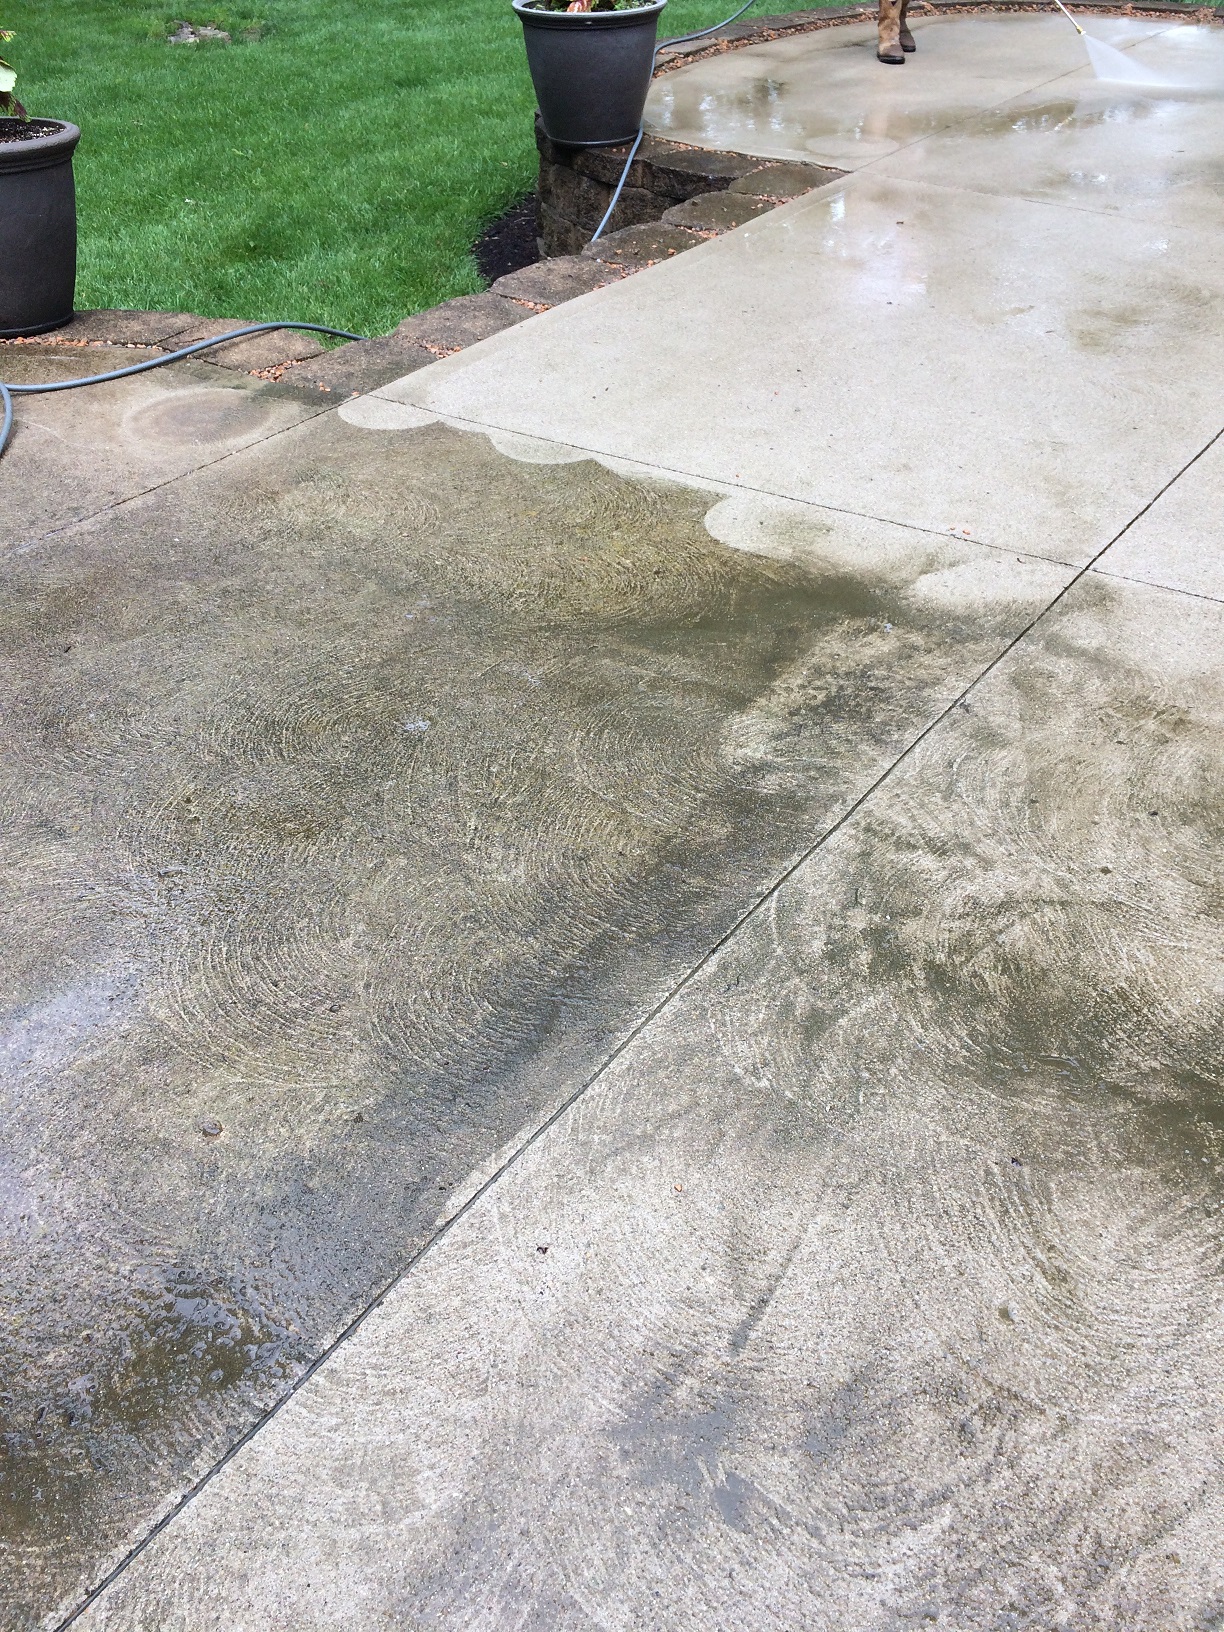 This was a shot of the patio during the cleaning